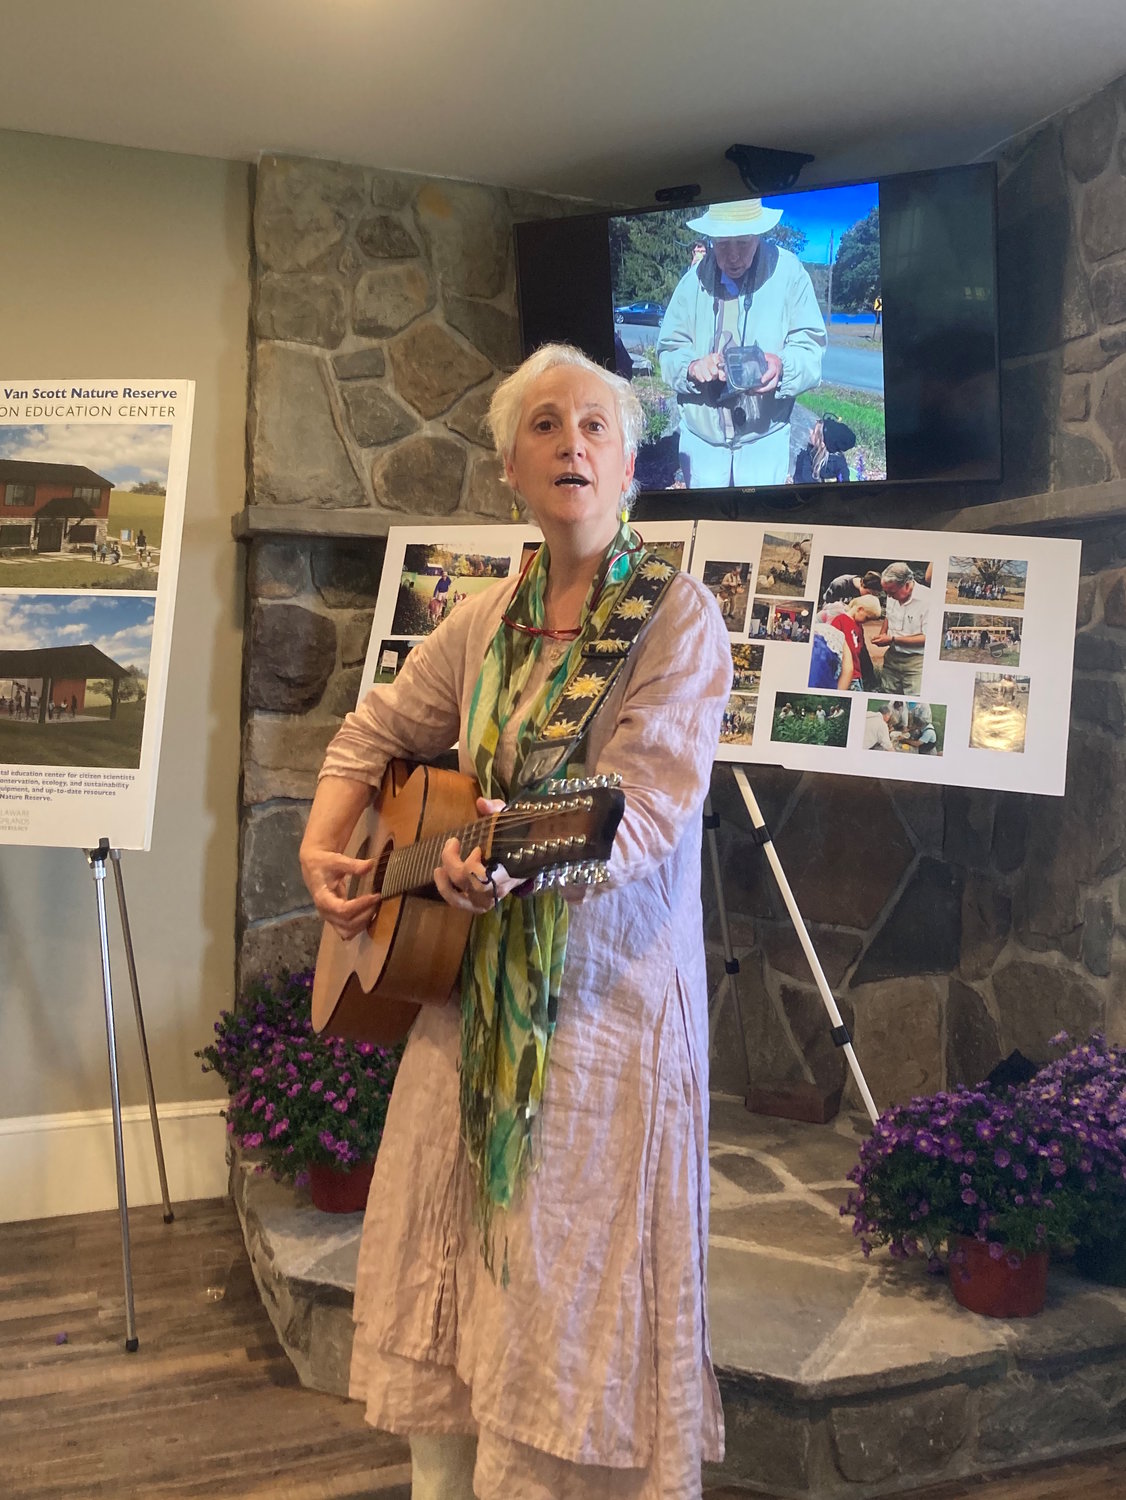 Longtime River Reporter publisher and editor, Rev. Laurie Stuart, shares her musical gifts at a memorial gathering celebrating the life of naturalist Ed Wesely, the founding author of this River Talk column. Wesely appears on the screen behind Stuart.